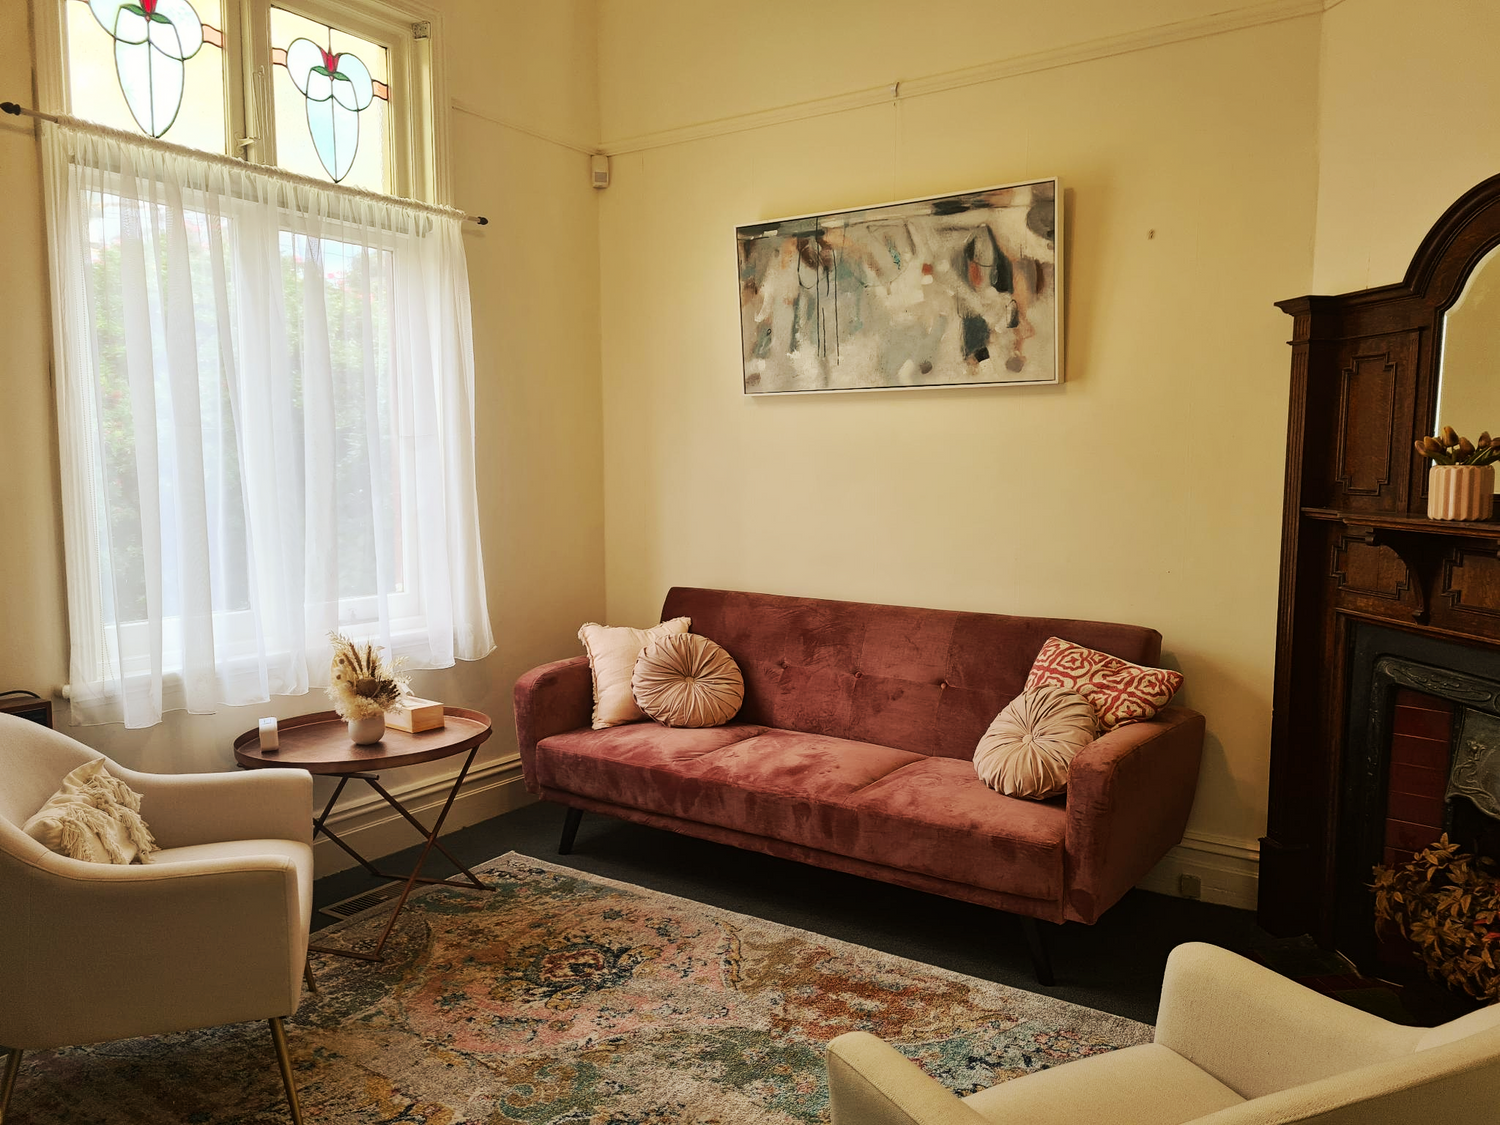 Gallery Photo of Counselling room